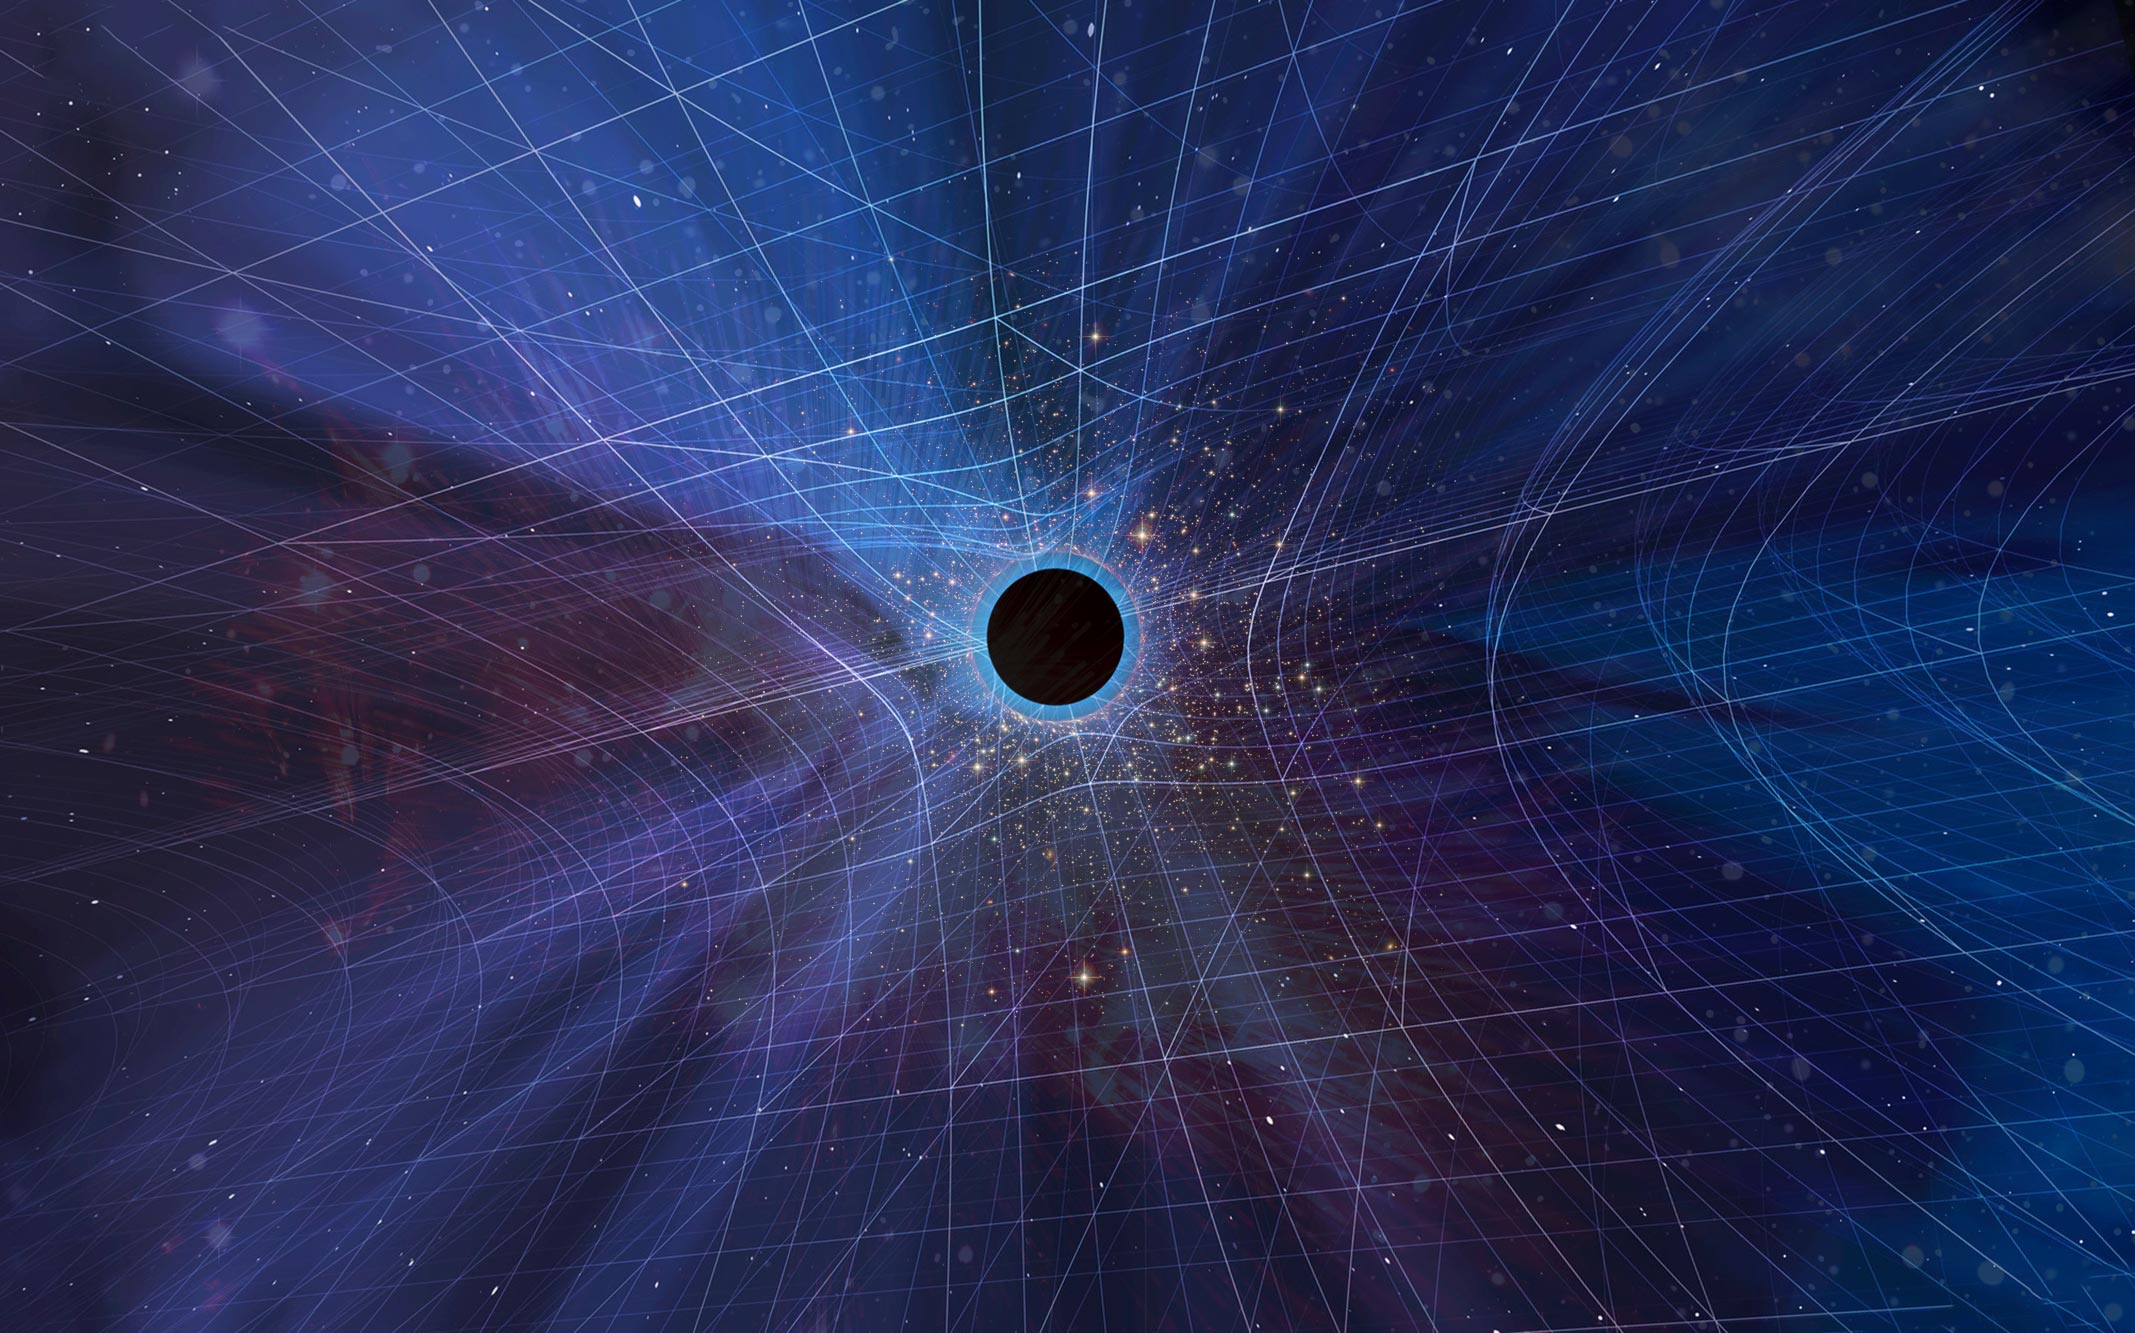 Student Clears Up "Massive" Black Hole Confusion